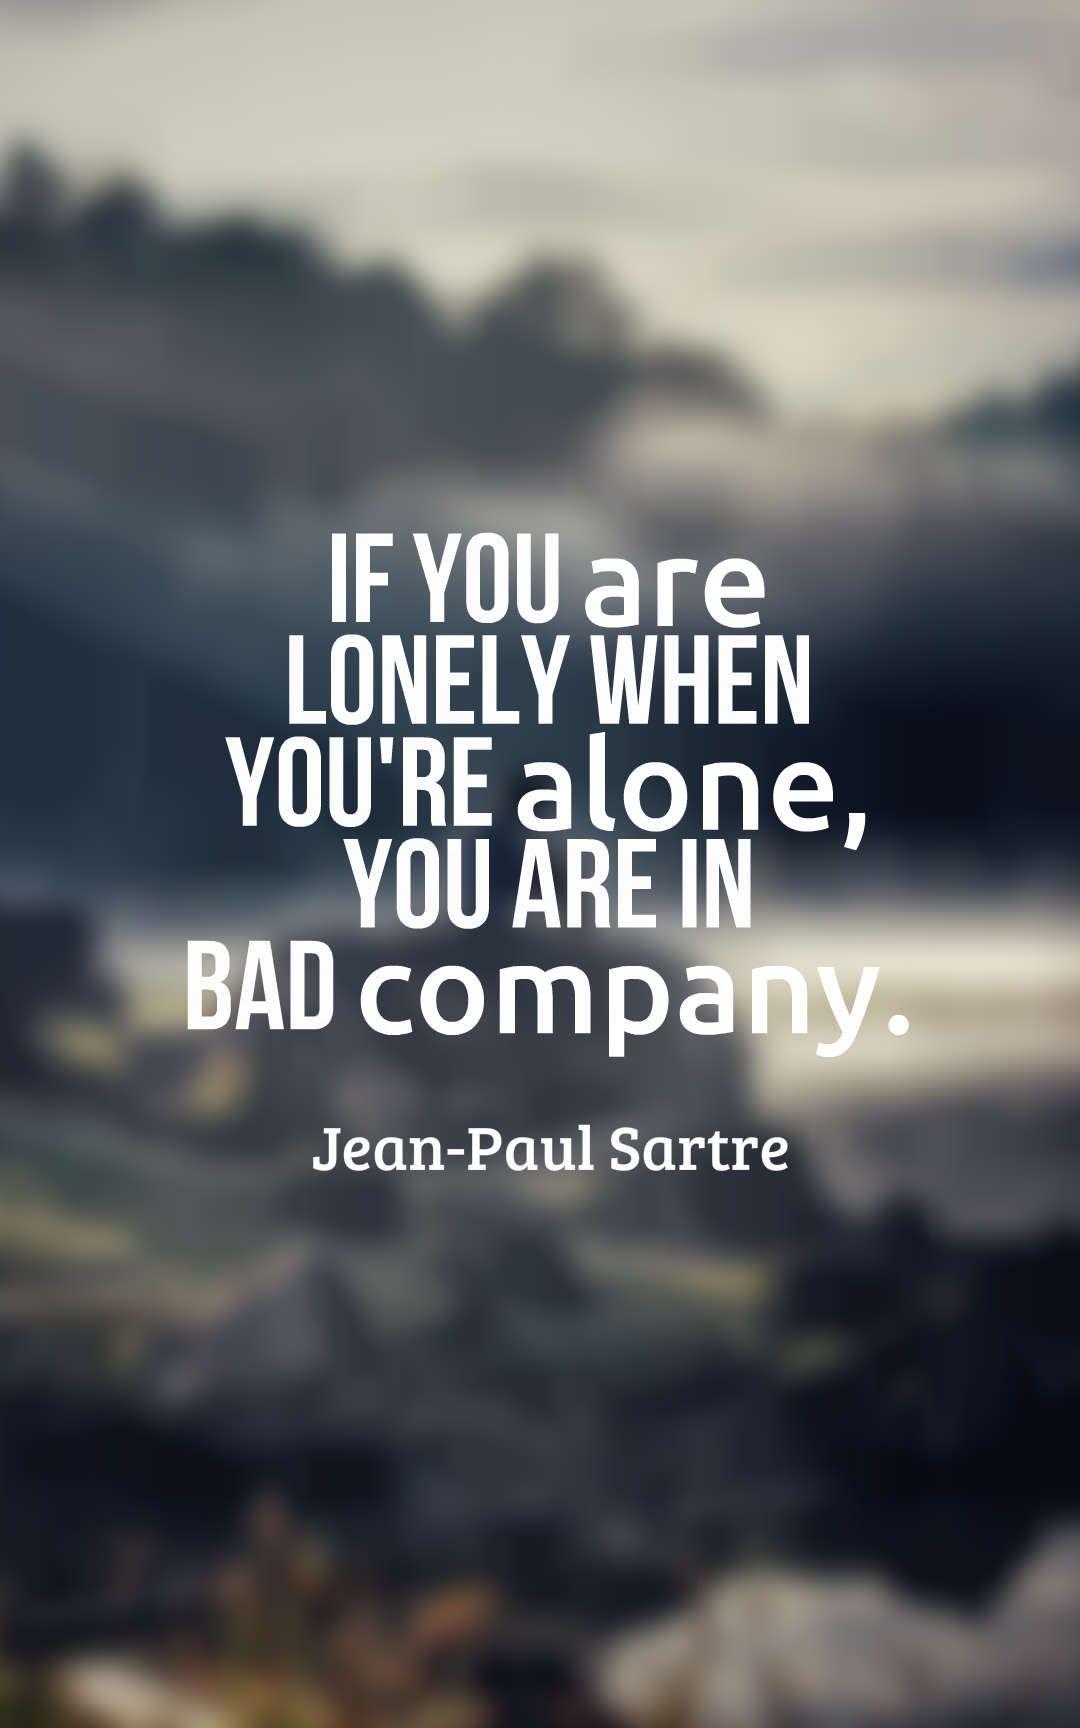 Heart Touching Lonely Quotes Best Loneliness Quotes 45 Lonely Quotes